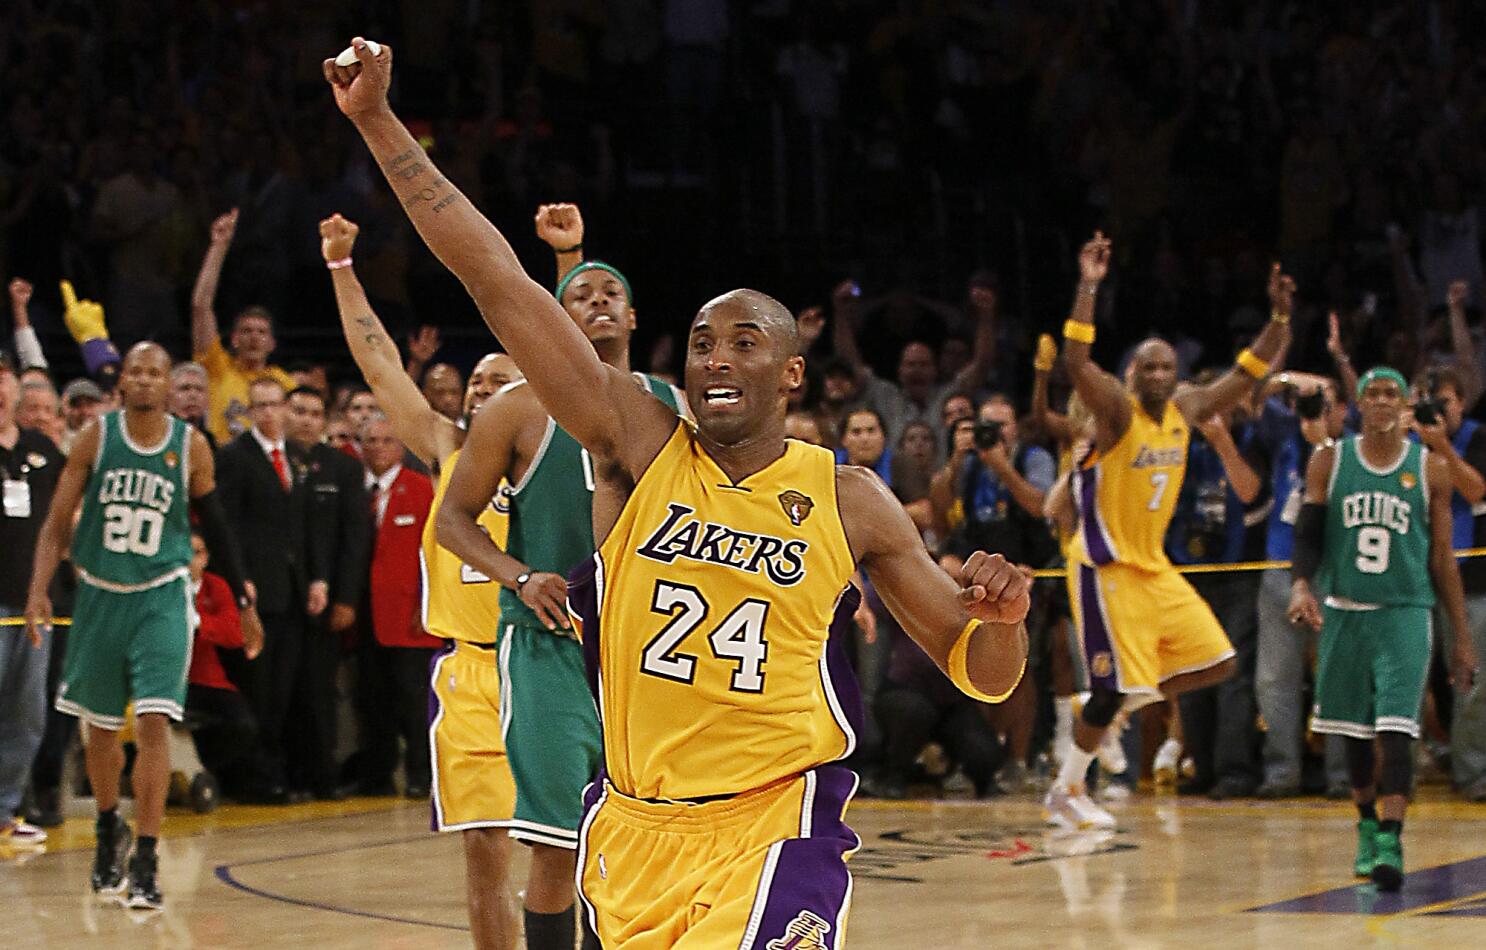 June 17, 2010 🏆 The Lakers won Game Seven over the Boston Celtics in the NBA  Finals.